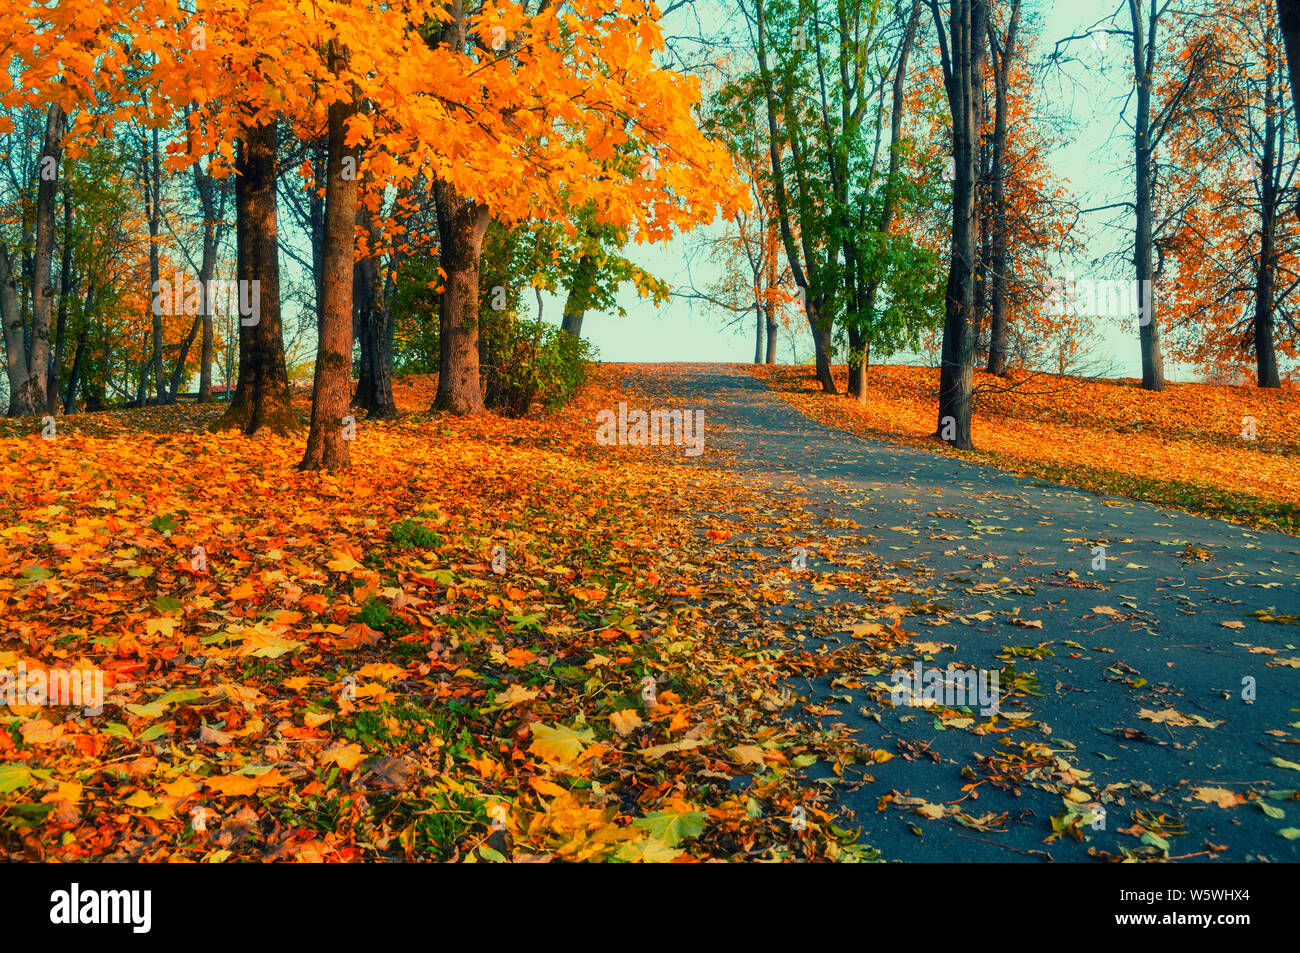 Autumn landscape - yellowed trees and fallen autumn leaves in city park alley in sunny evening. Picturesque park autumn scene Stock Photo